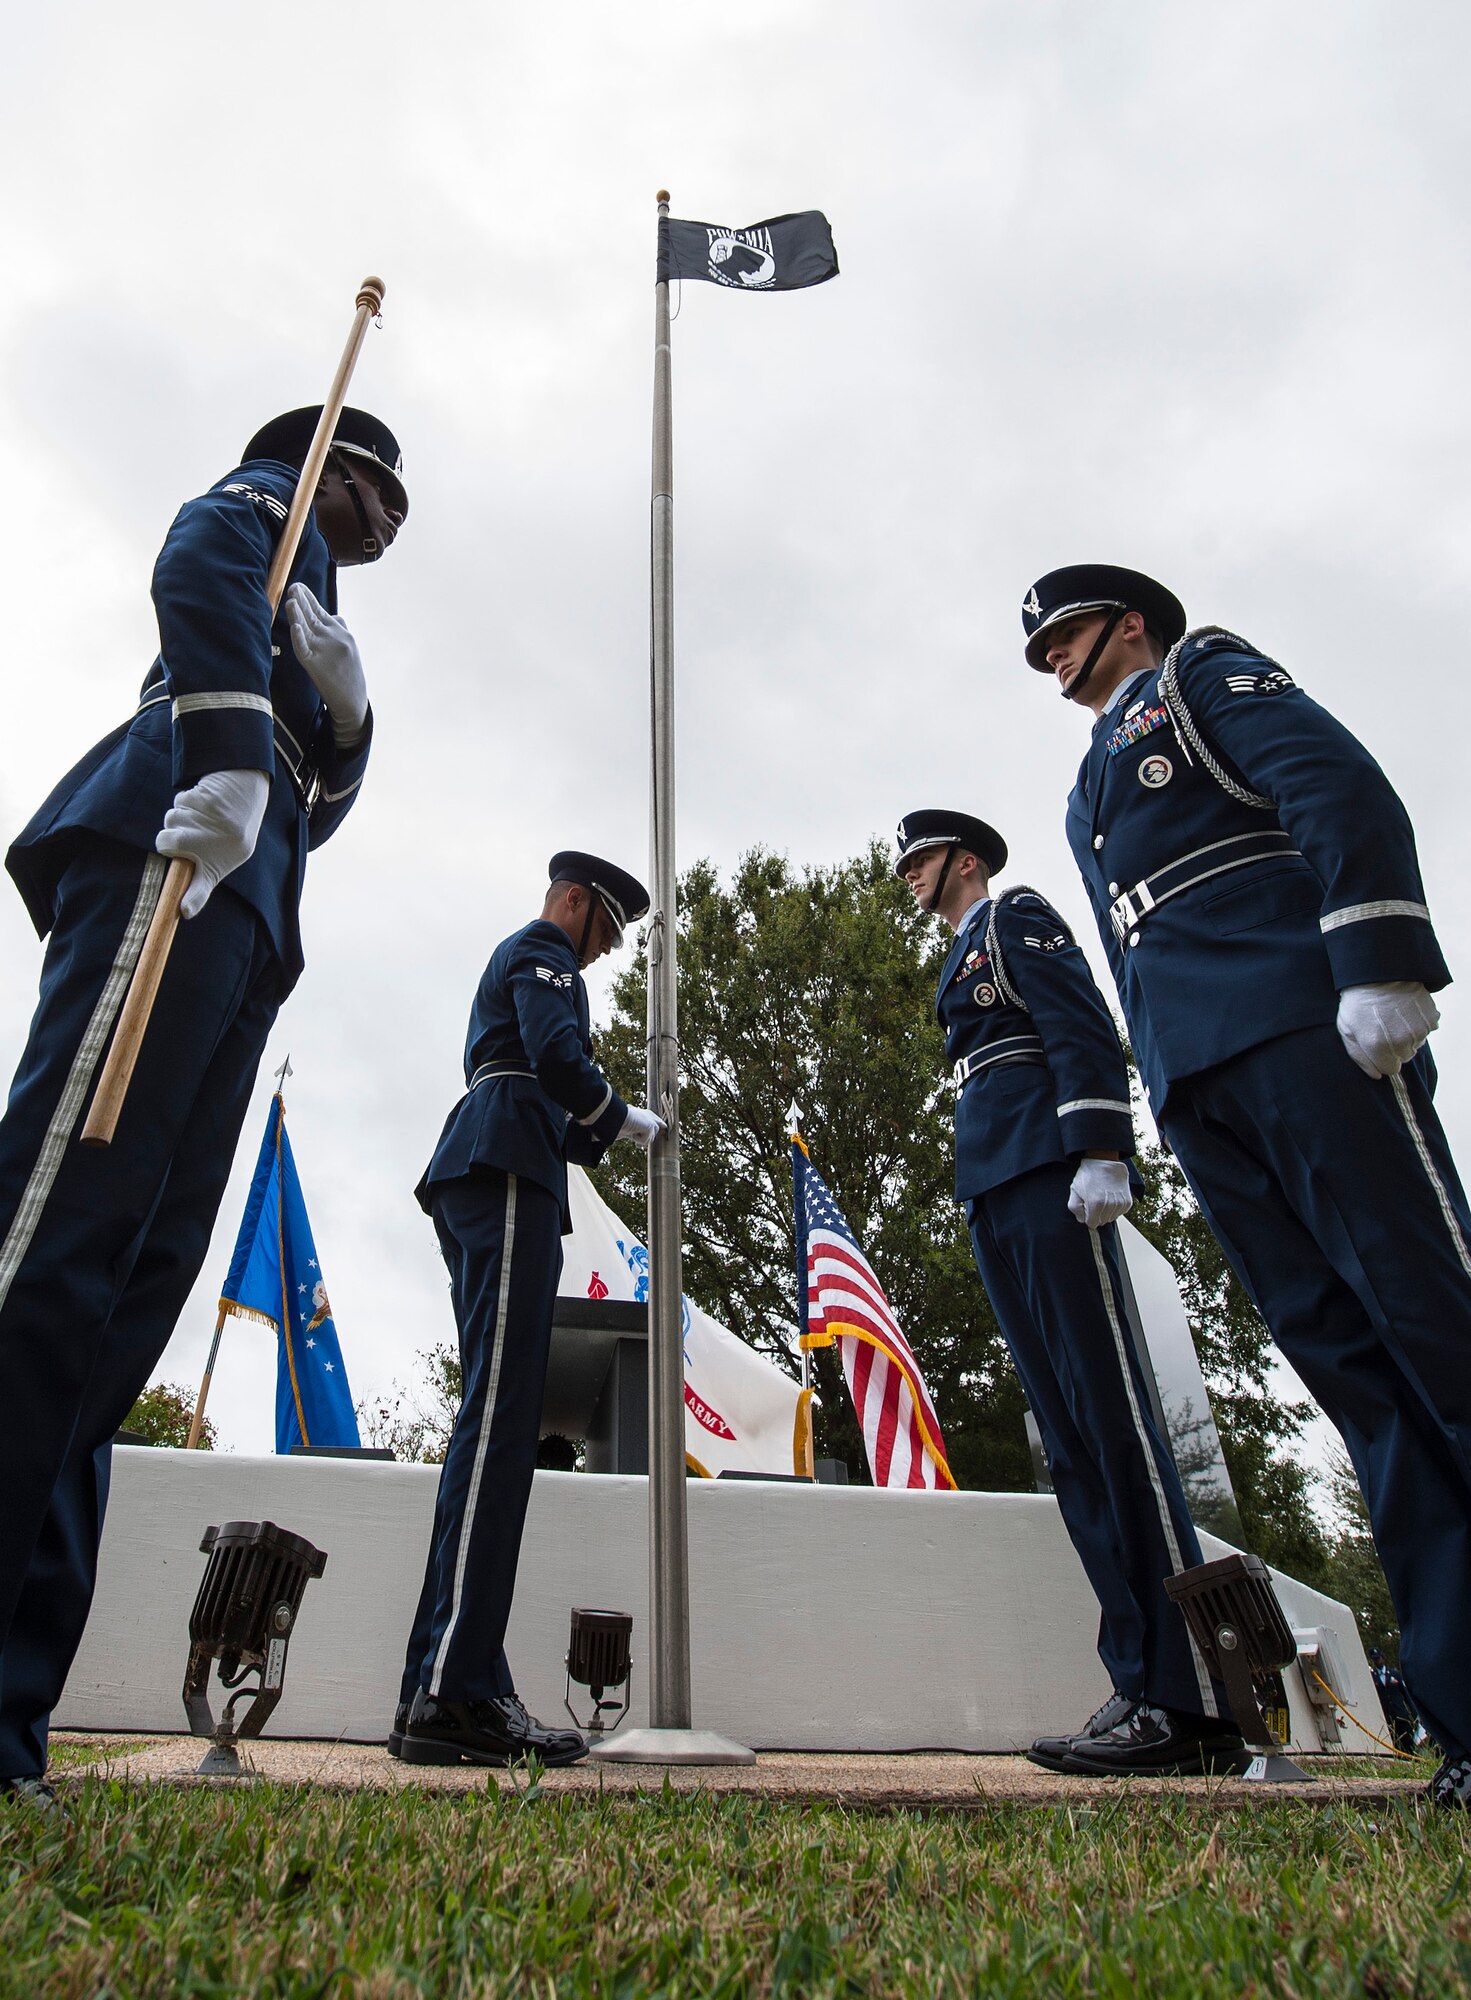 Members of the 633rd Air Base Wing Honor Guard raise the Prisoner of War/Missing in Action flag during a POW/MIA closing ceremony at Joint Base Langley-Eustis, Va., Sept. 16, 2016. In addition to the ceremony, Service members participated in a 24-hour run, during which they ran with the POW/MIA flag to recognize the sacrifices made by those missing in action or those who suffered as prisoners of war. (U.S. Air Force photo by Staff Sgt. Nick Wilson/Released)